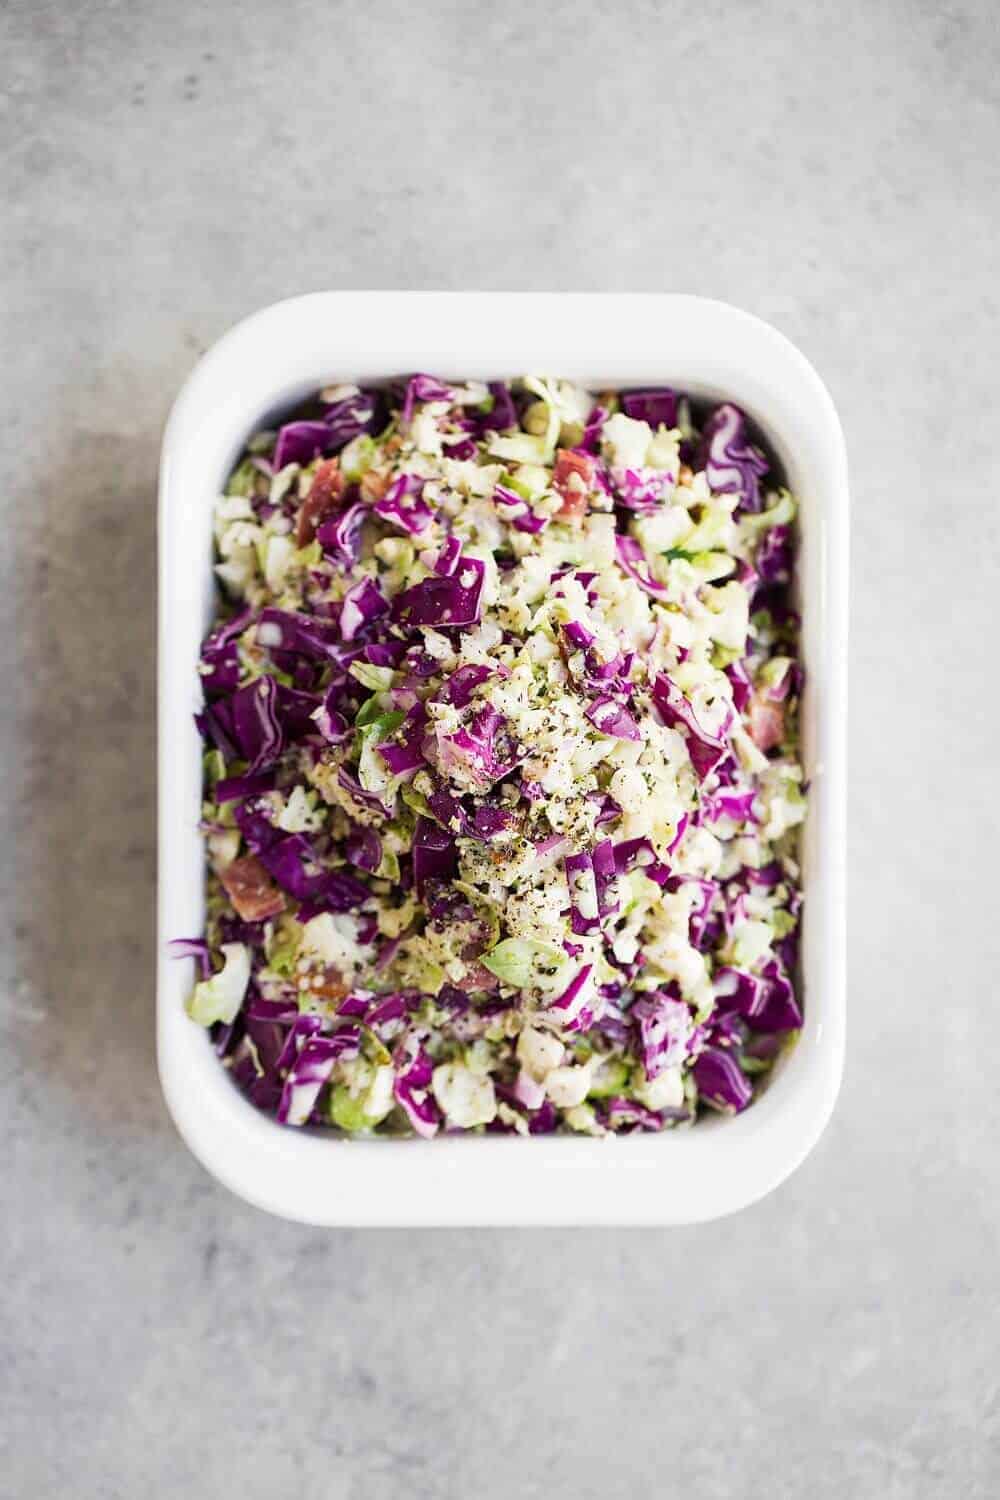 Paleo Brussels Sprout Slaw in a white side dish